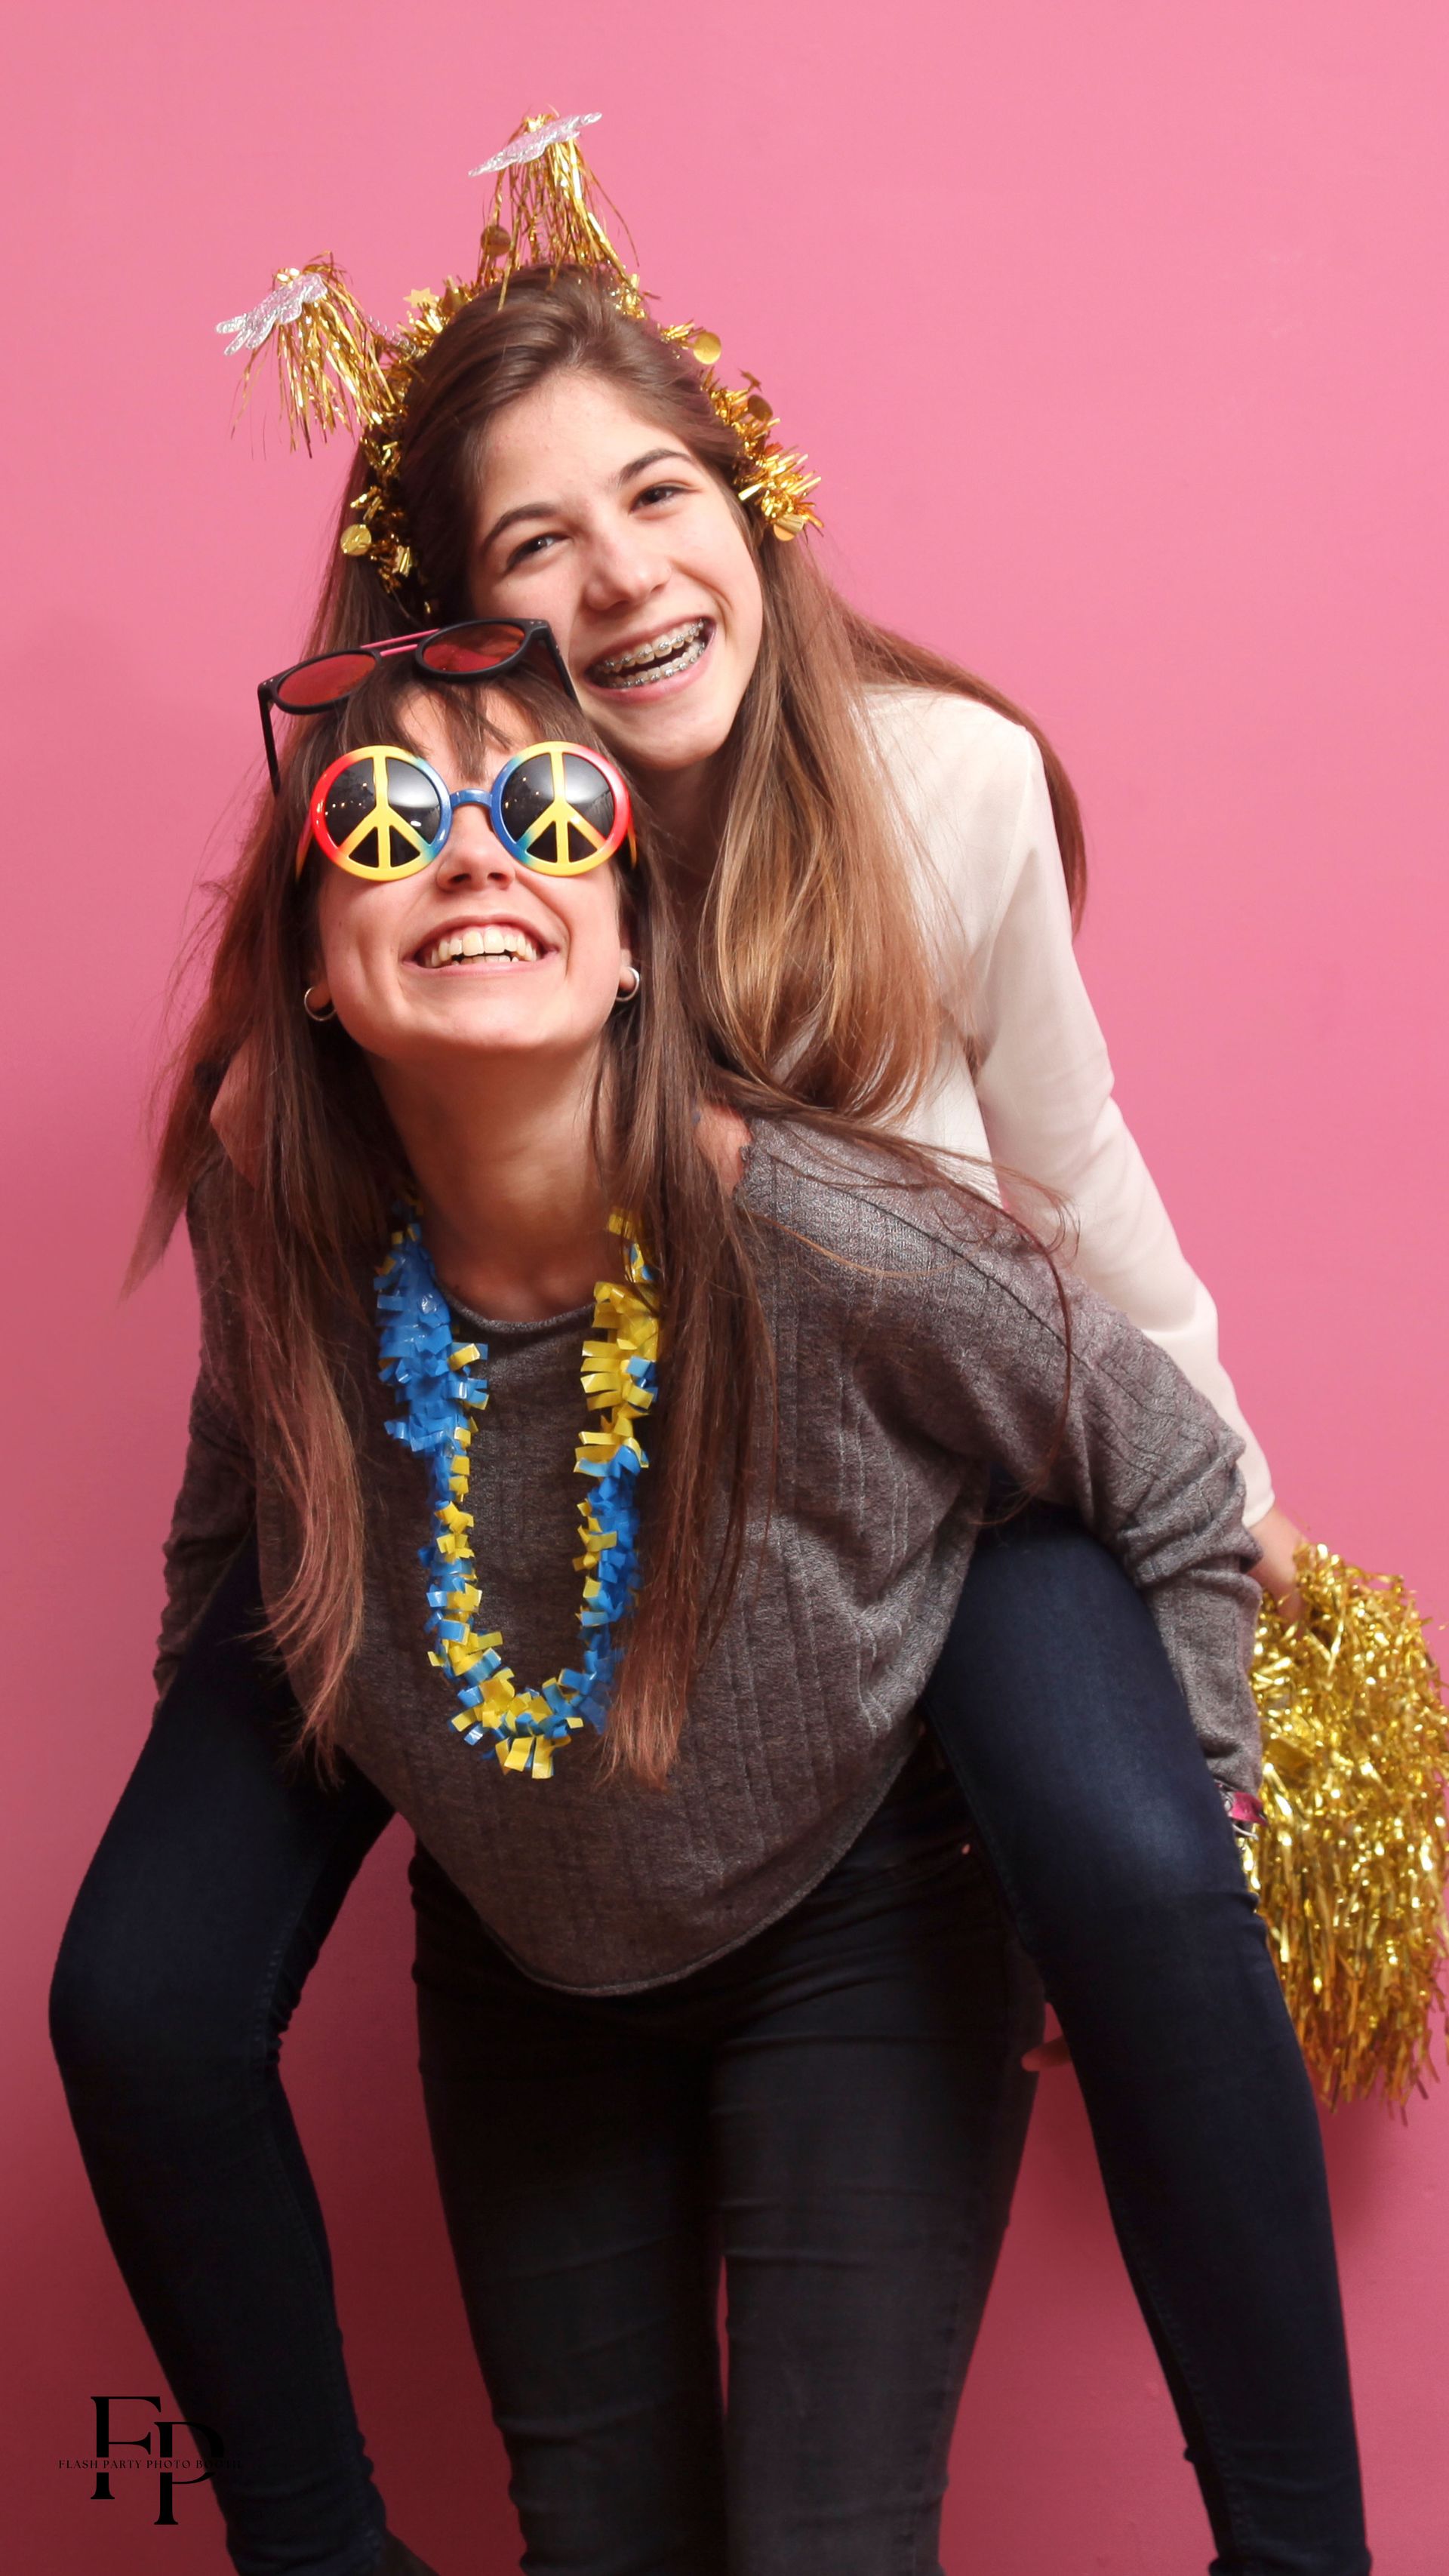 Two girls enjoy a fun-filled photo op with props at the graduation celebration.